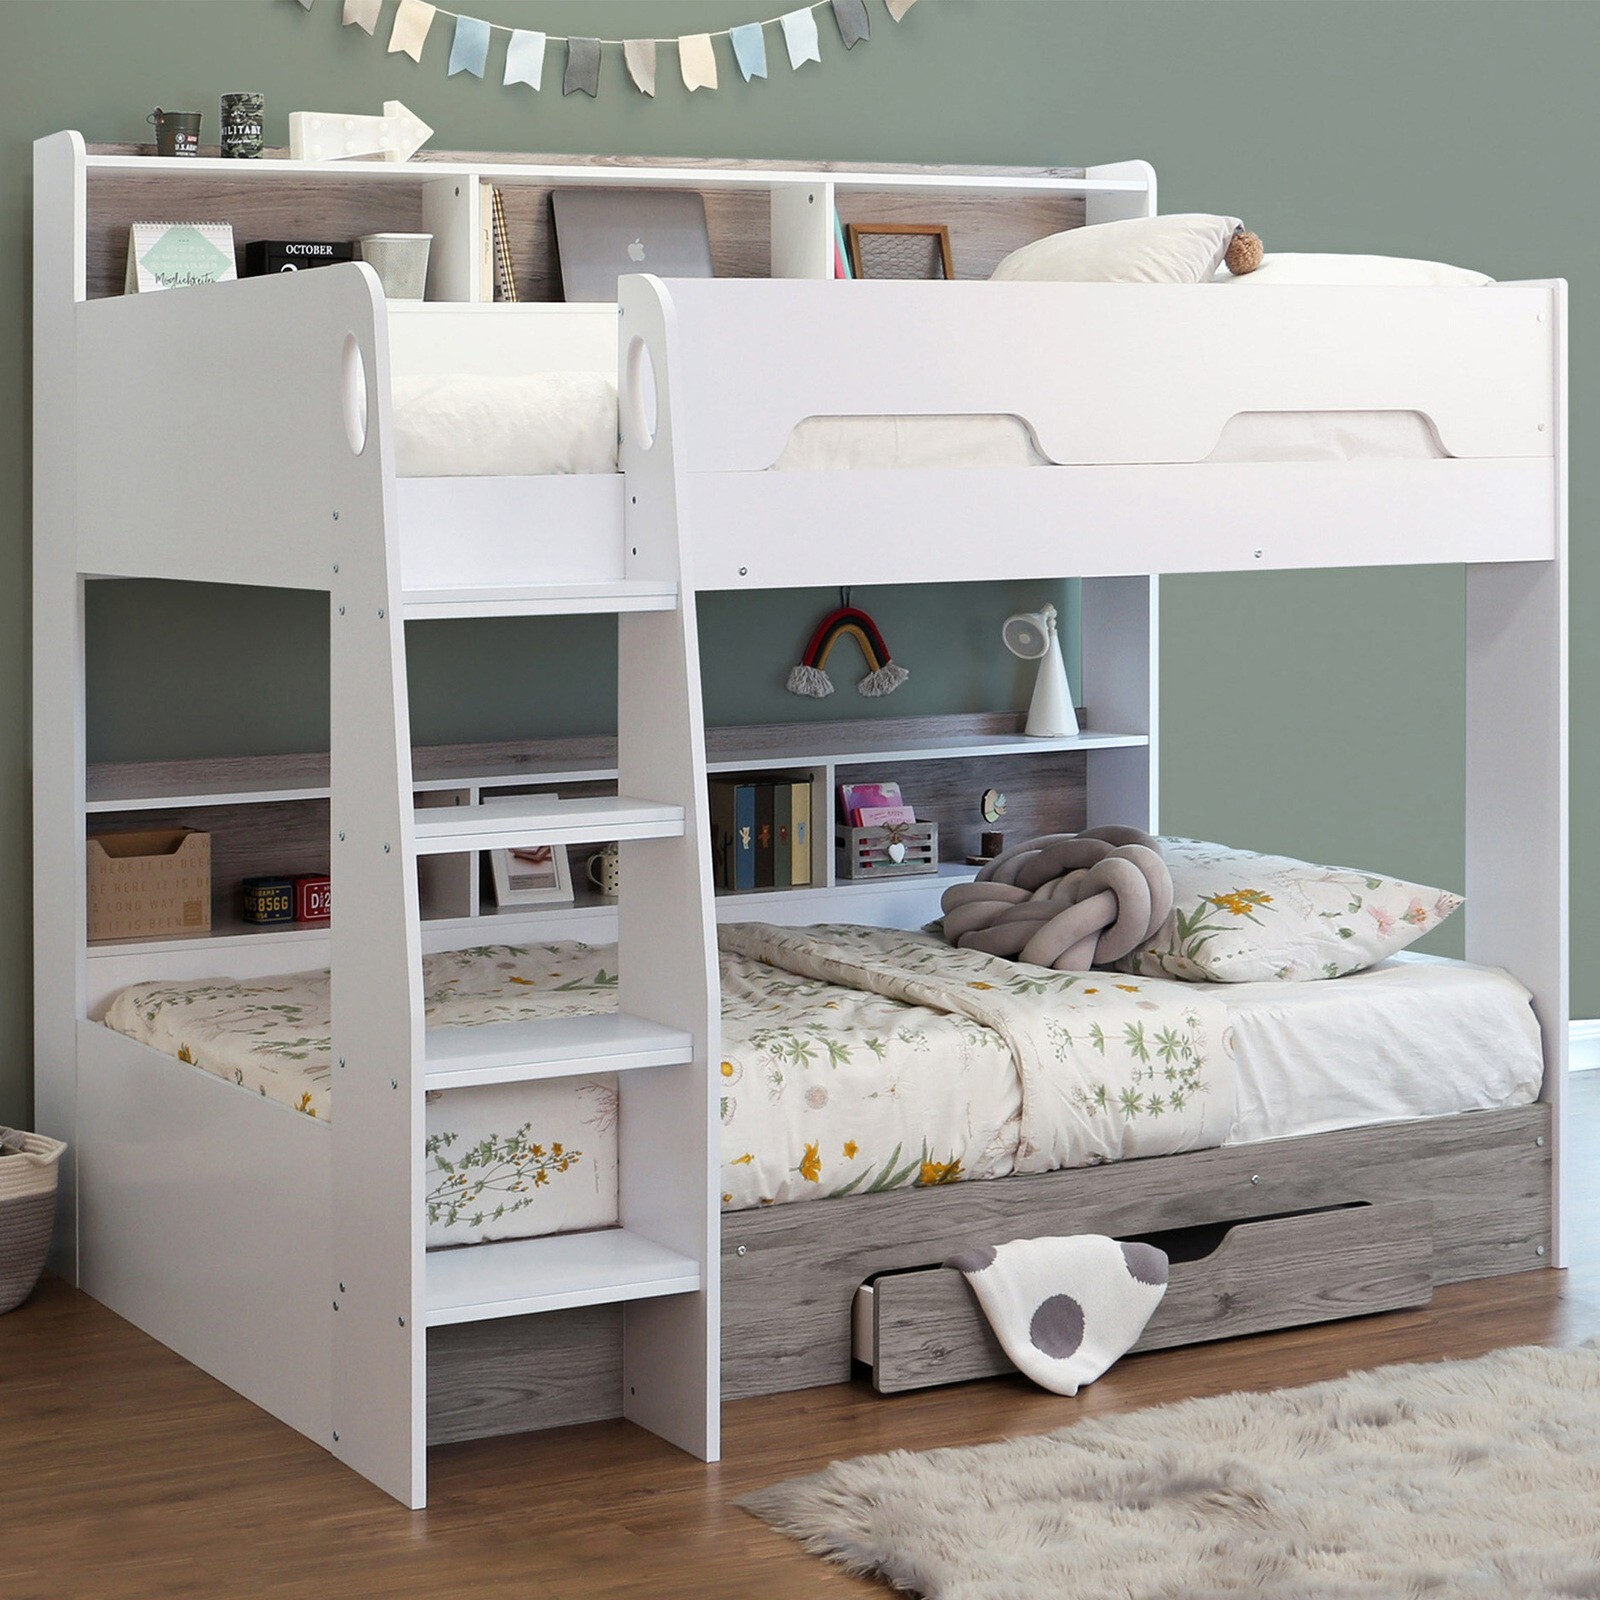 Castel Single Bunk Bed With Shelves And, Happy Beds American Wood Bunk Bed